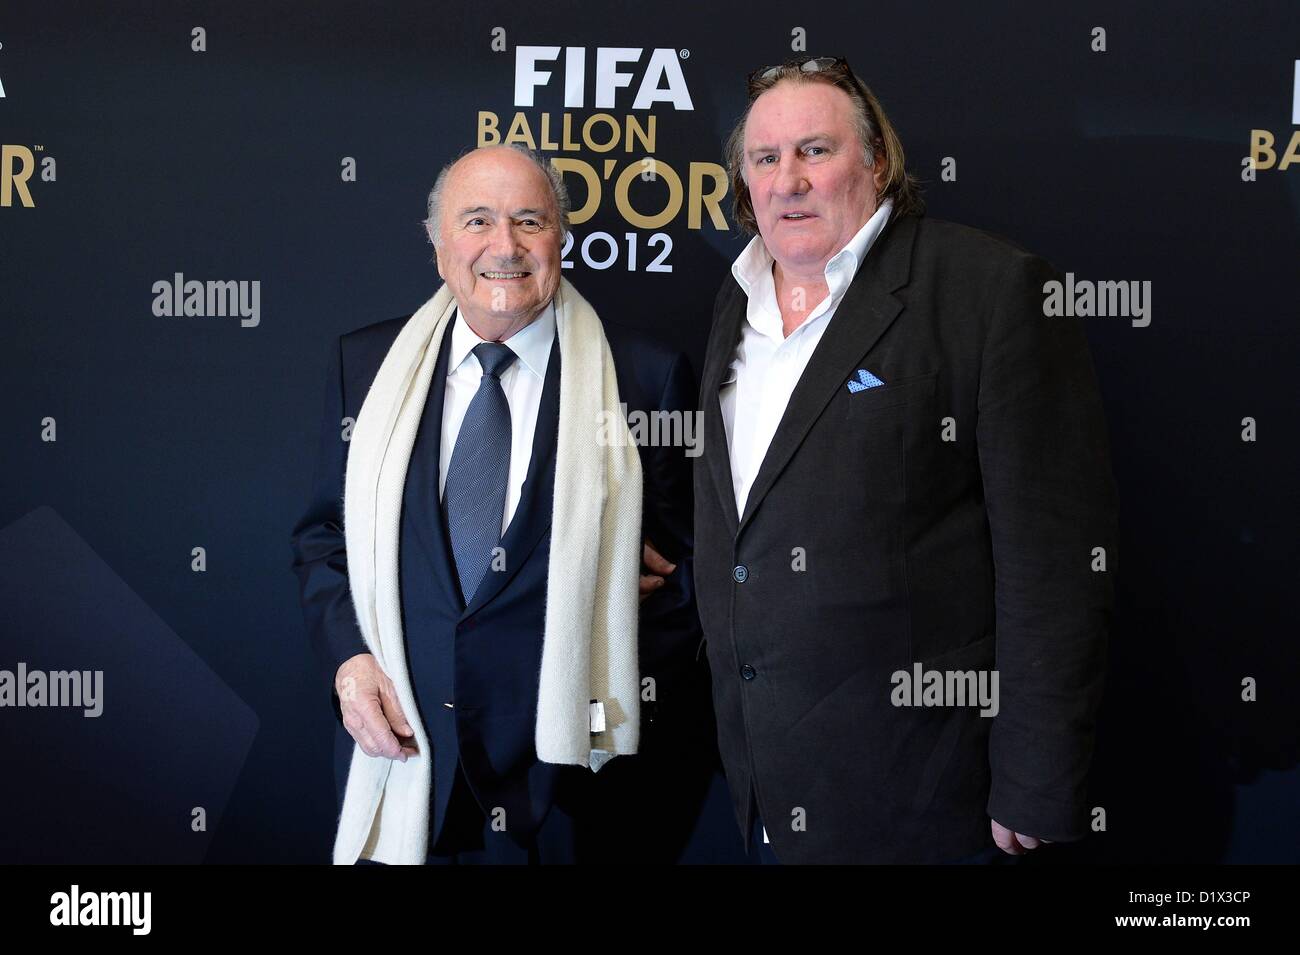 07.01.2013. Zurich, Switzerland.  FIFA Balloon D'Or 2012 FIFA Boss Sepp Blatter and Gerard Depardieu arrive for the Award ceremony Stock Photo